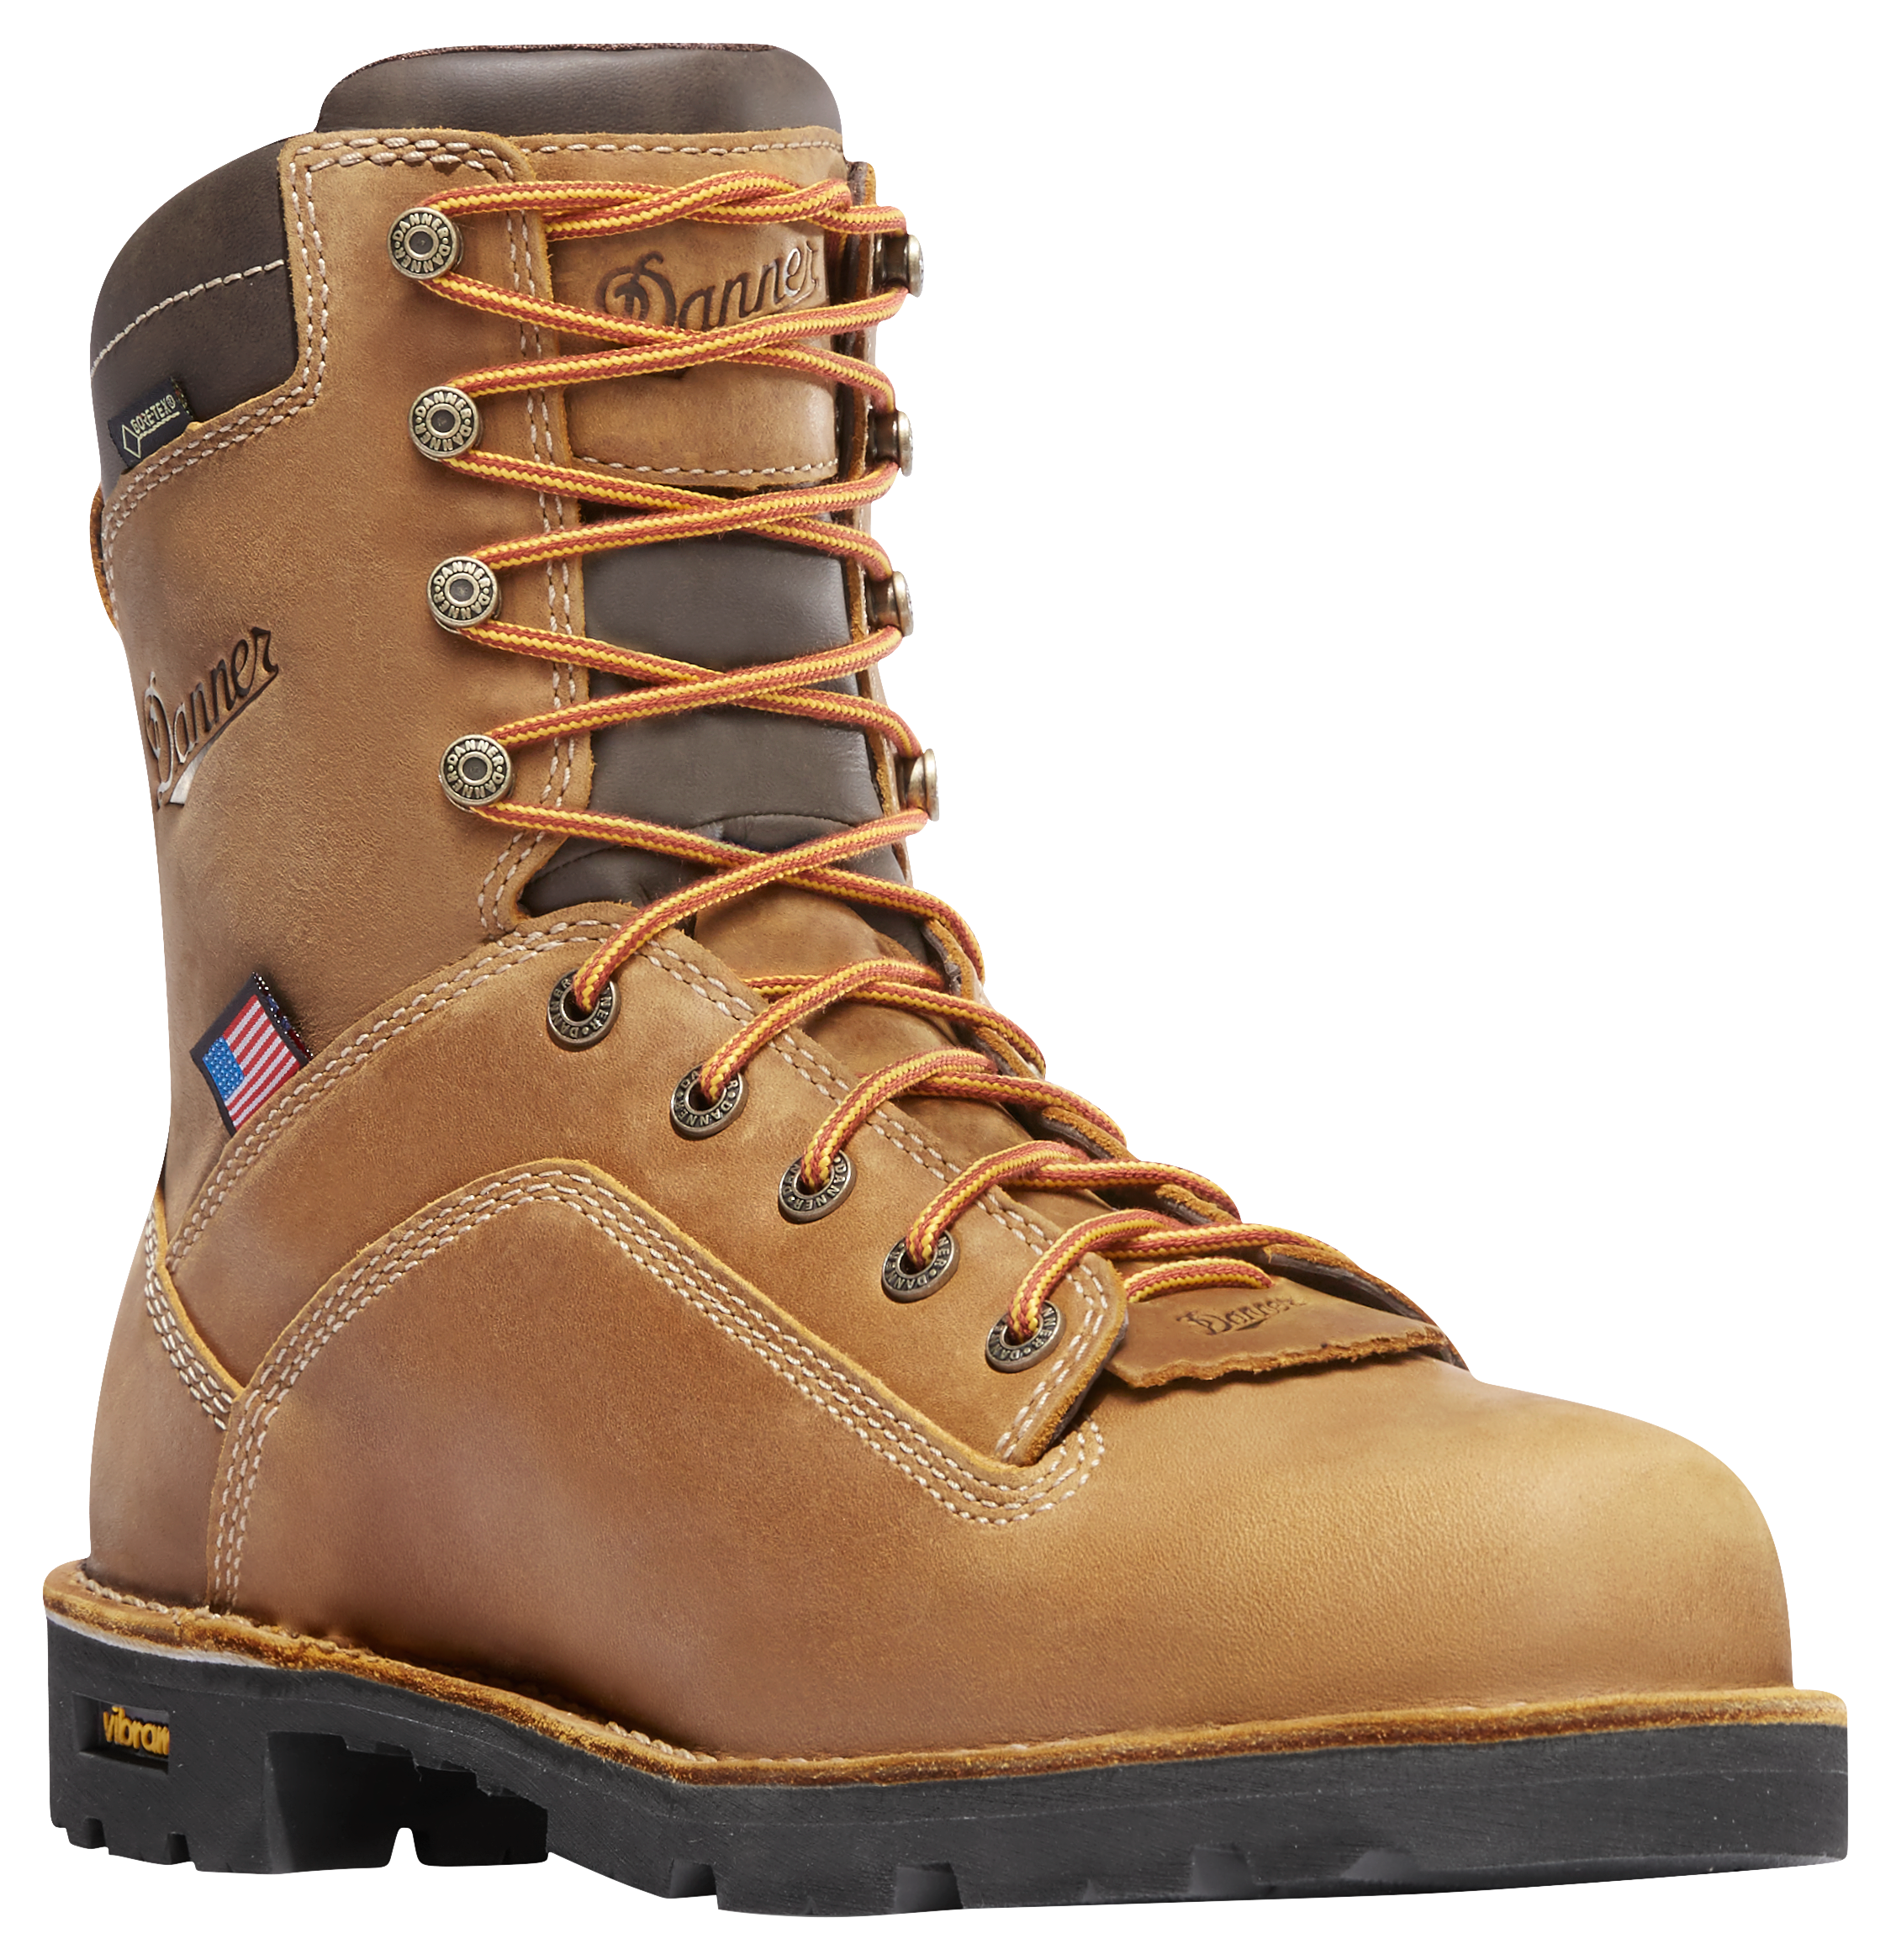 Danner Quarry USA GORE-TEX Insulated Work Boots for Men - Distress Brown - 10W